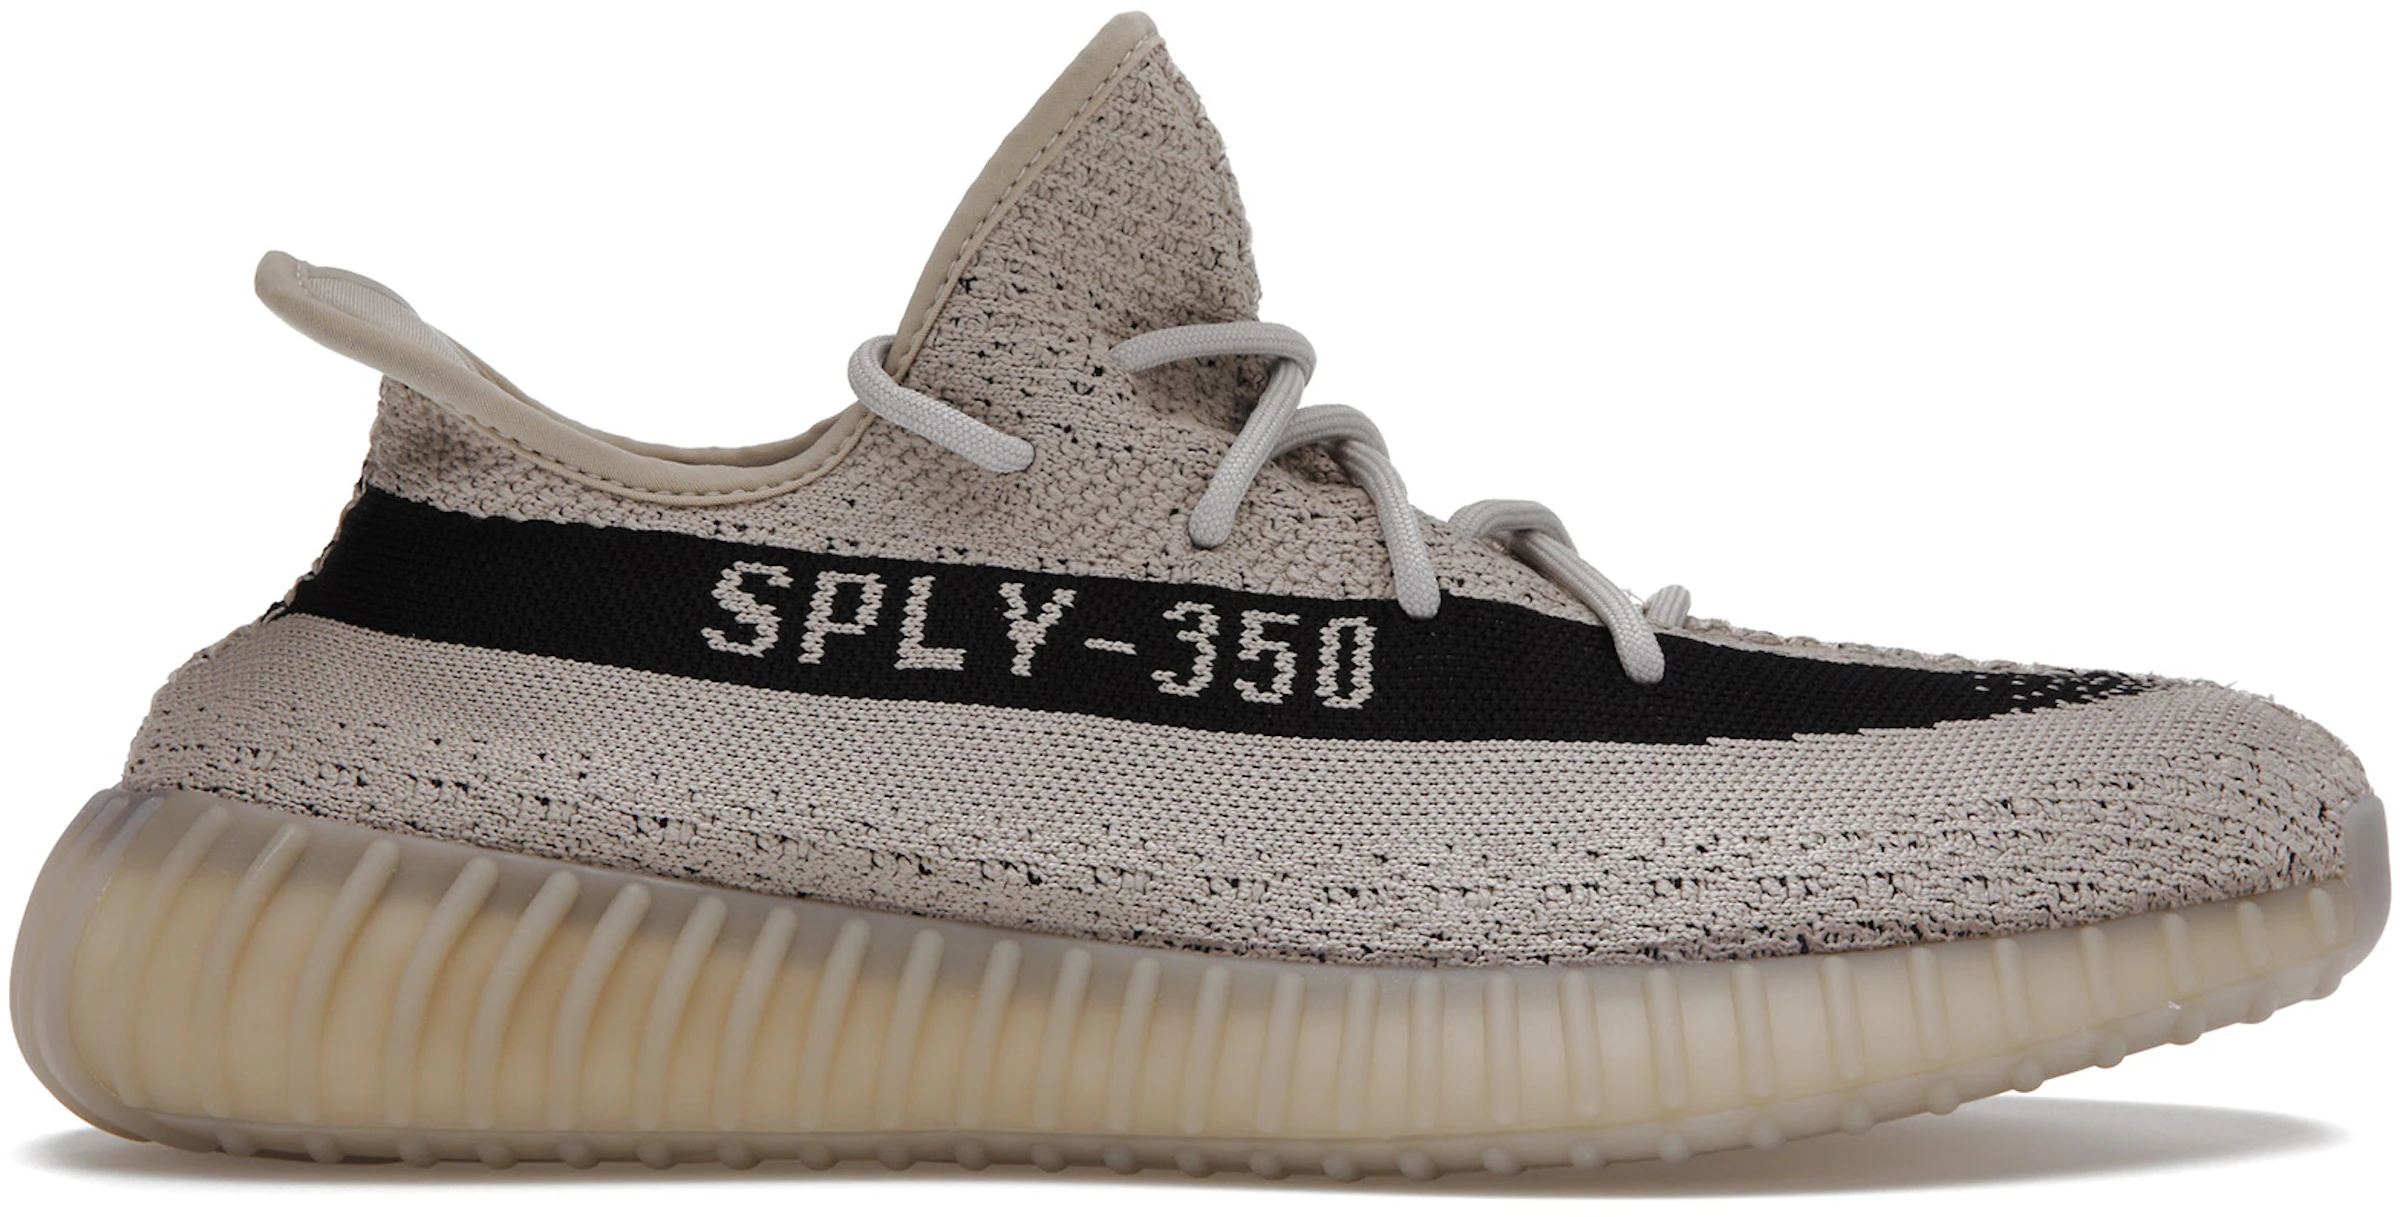 Claire Debe ético adidas Yeezy Boost 350 V2 Slate - HP7870 - US